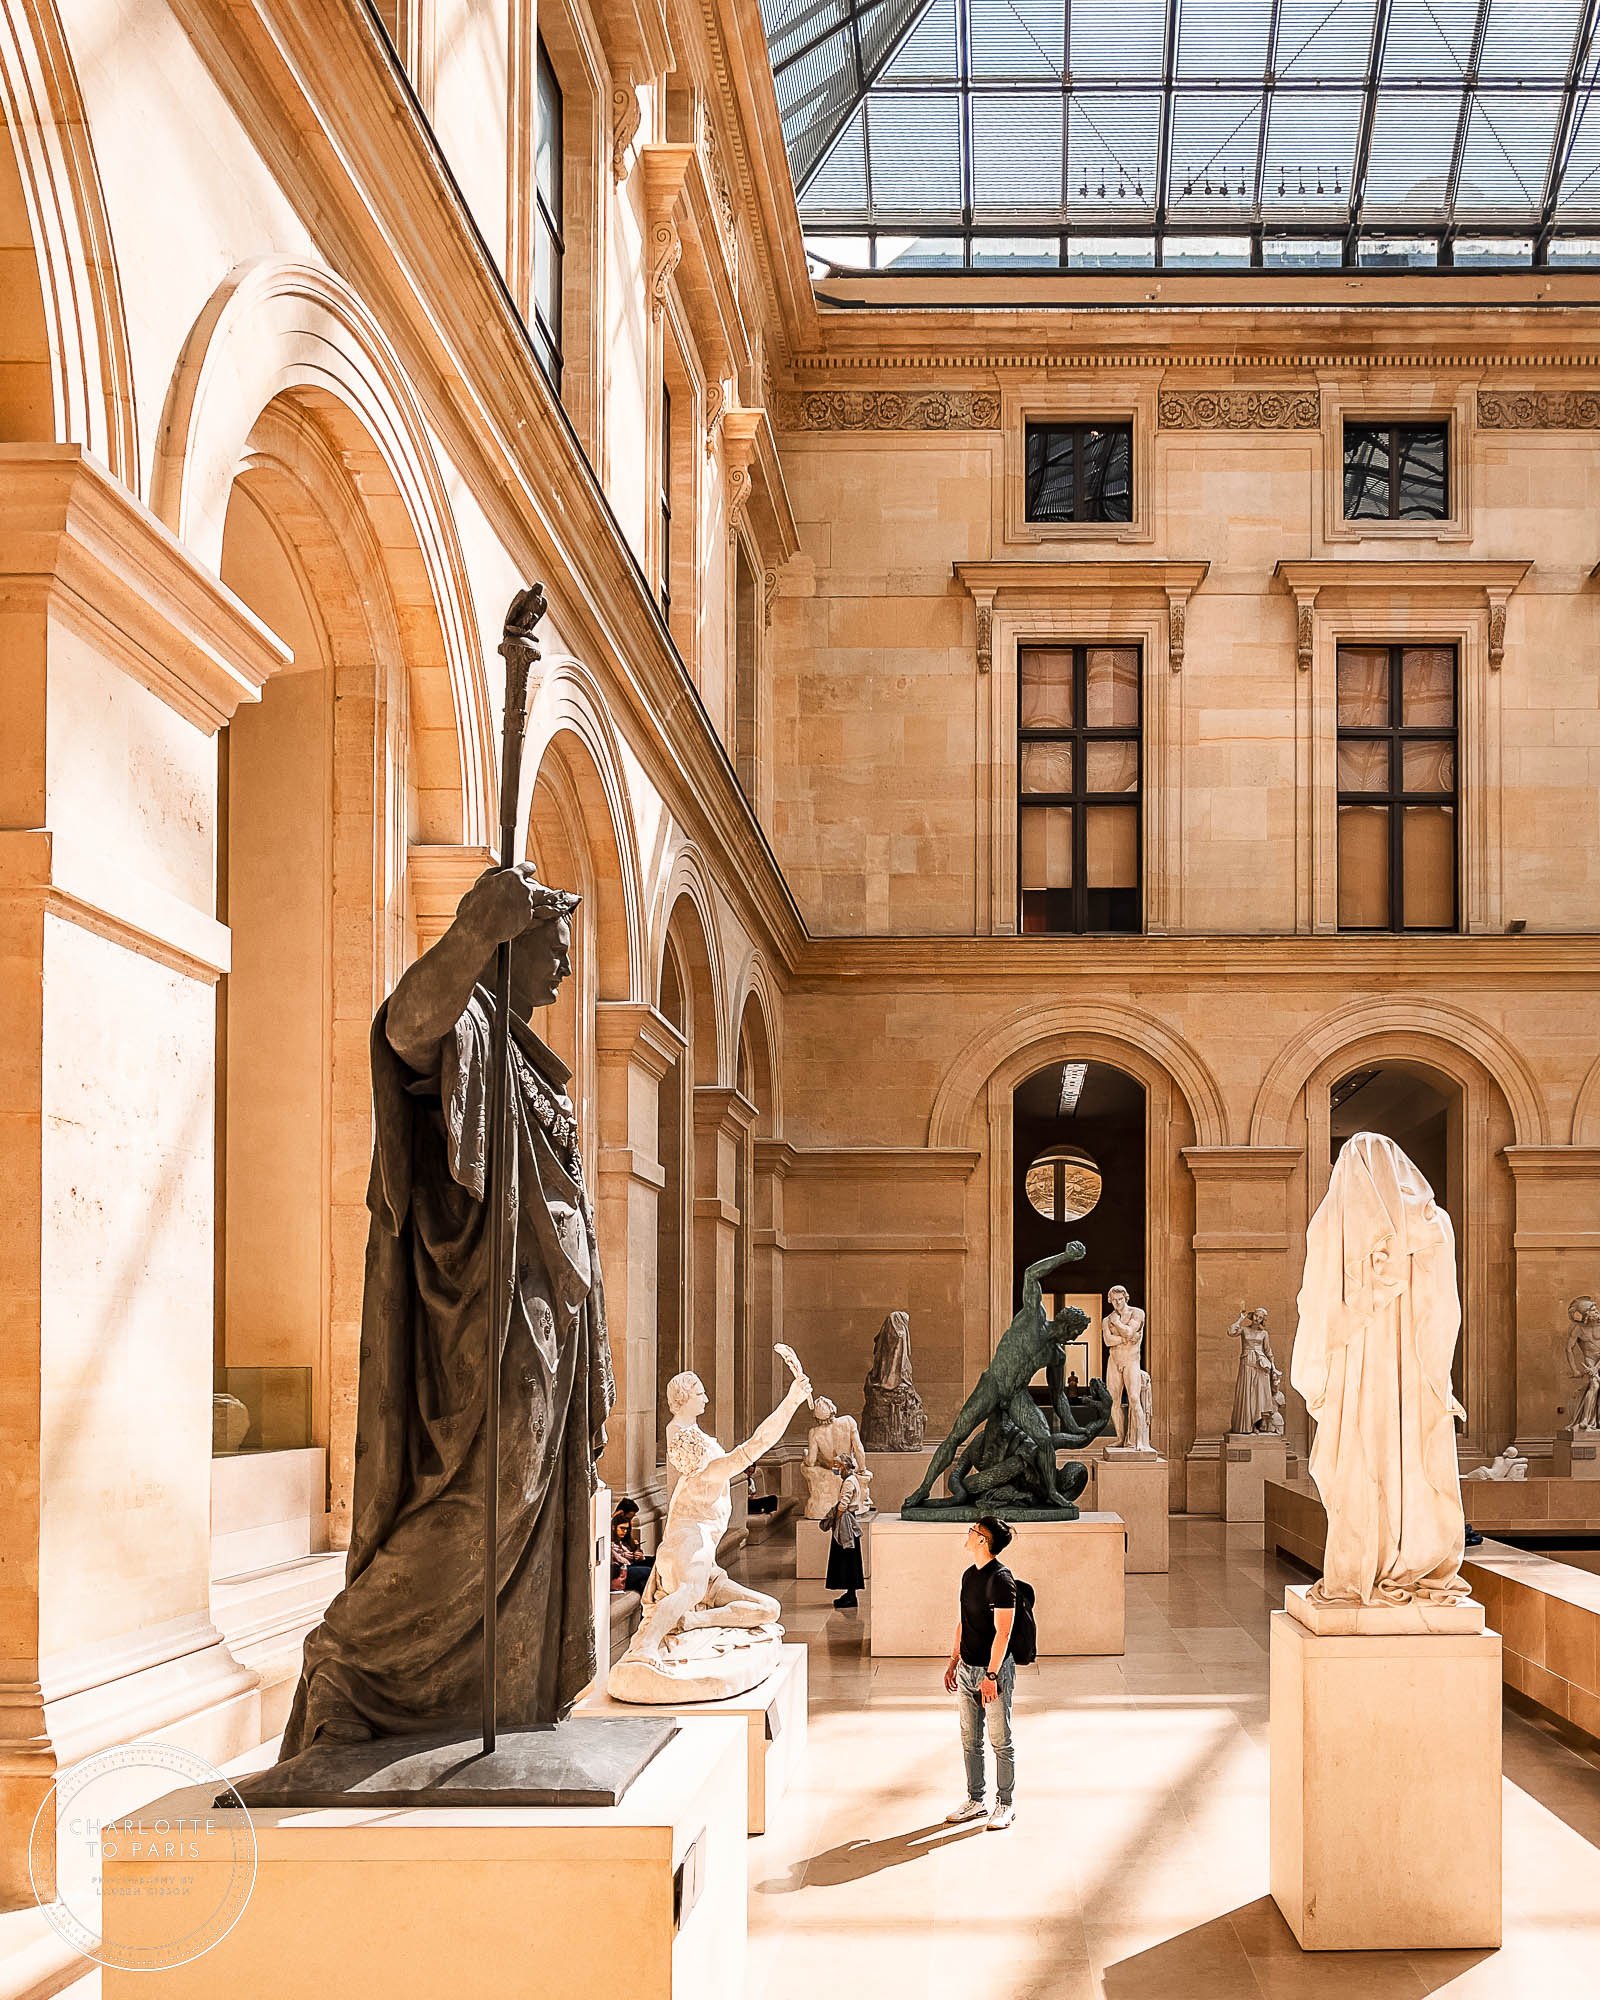 Cour Marly, Louvre